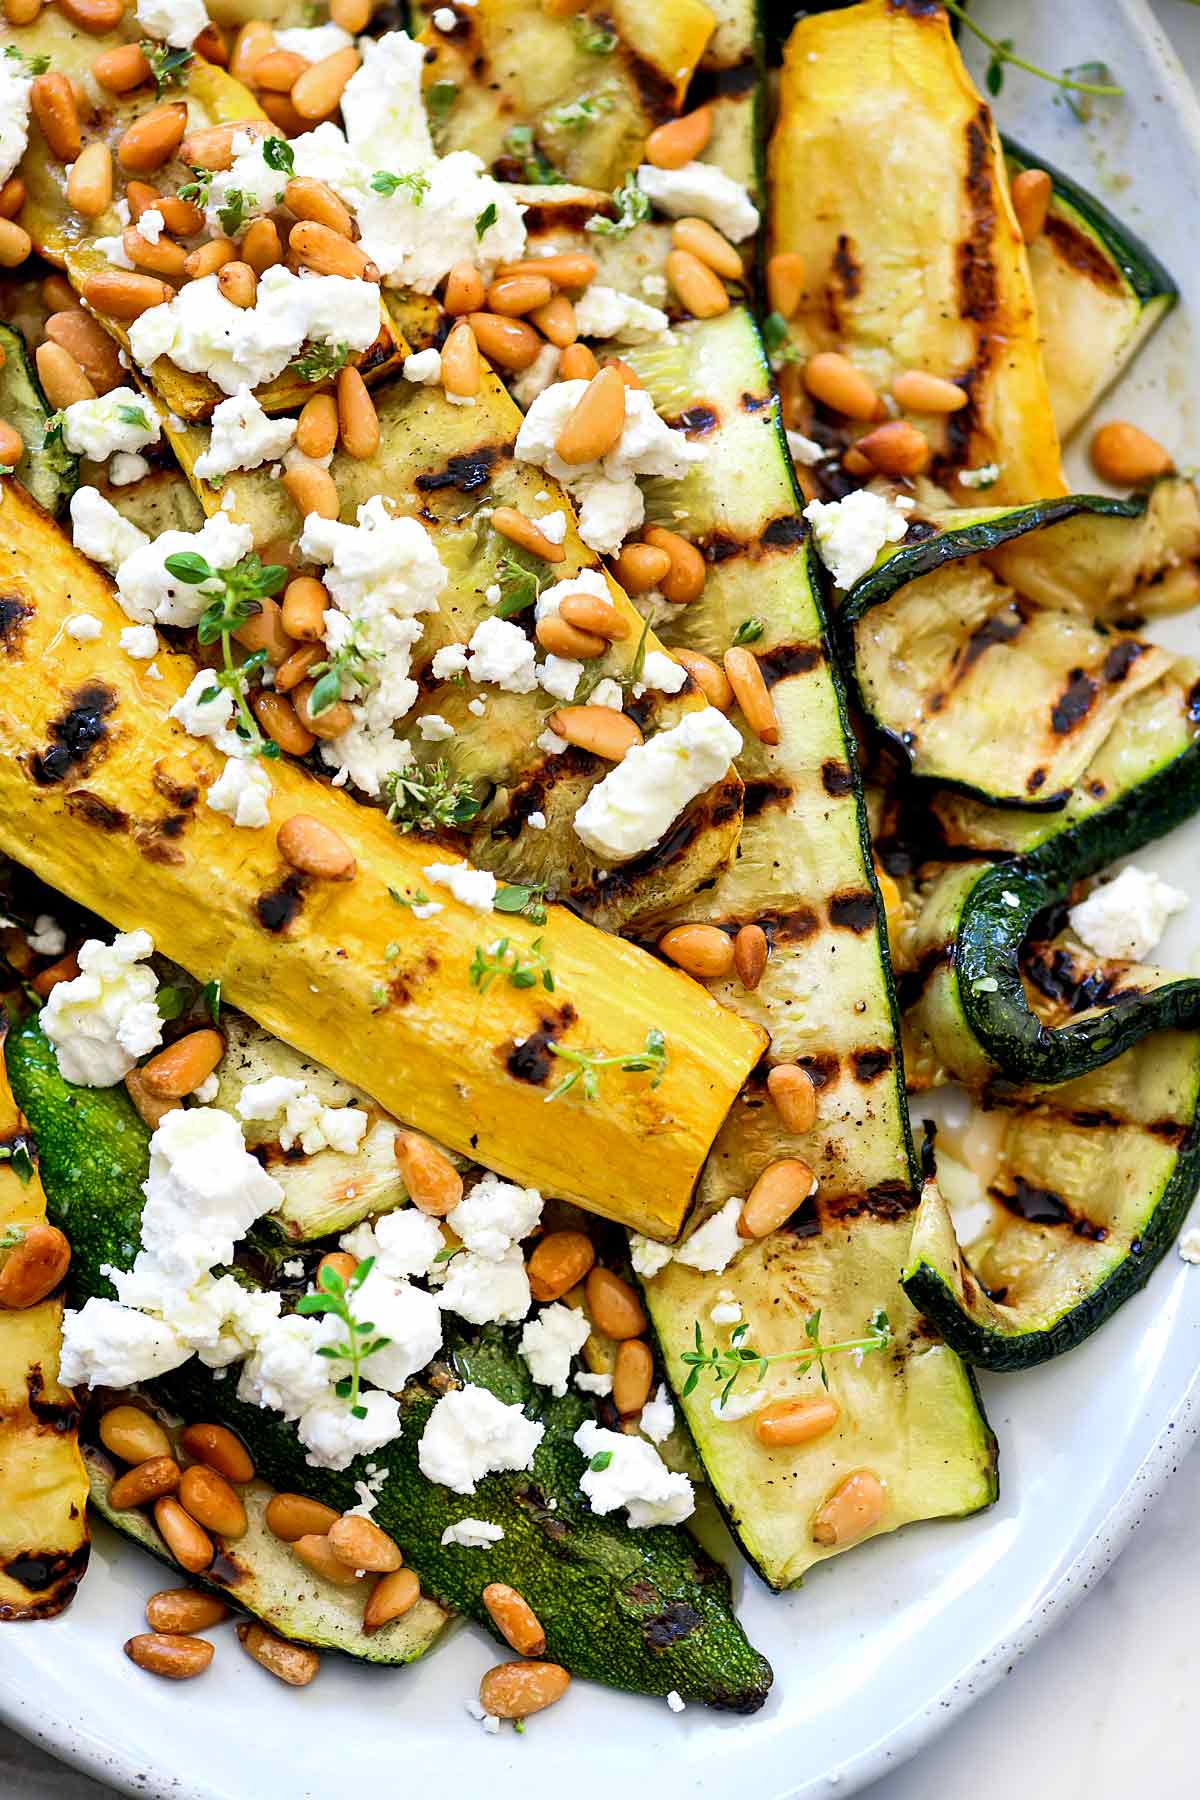 Grilled Zucchini With Goat Cheese and Pine Nuts | foodiecrush.com